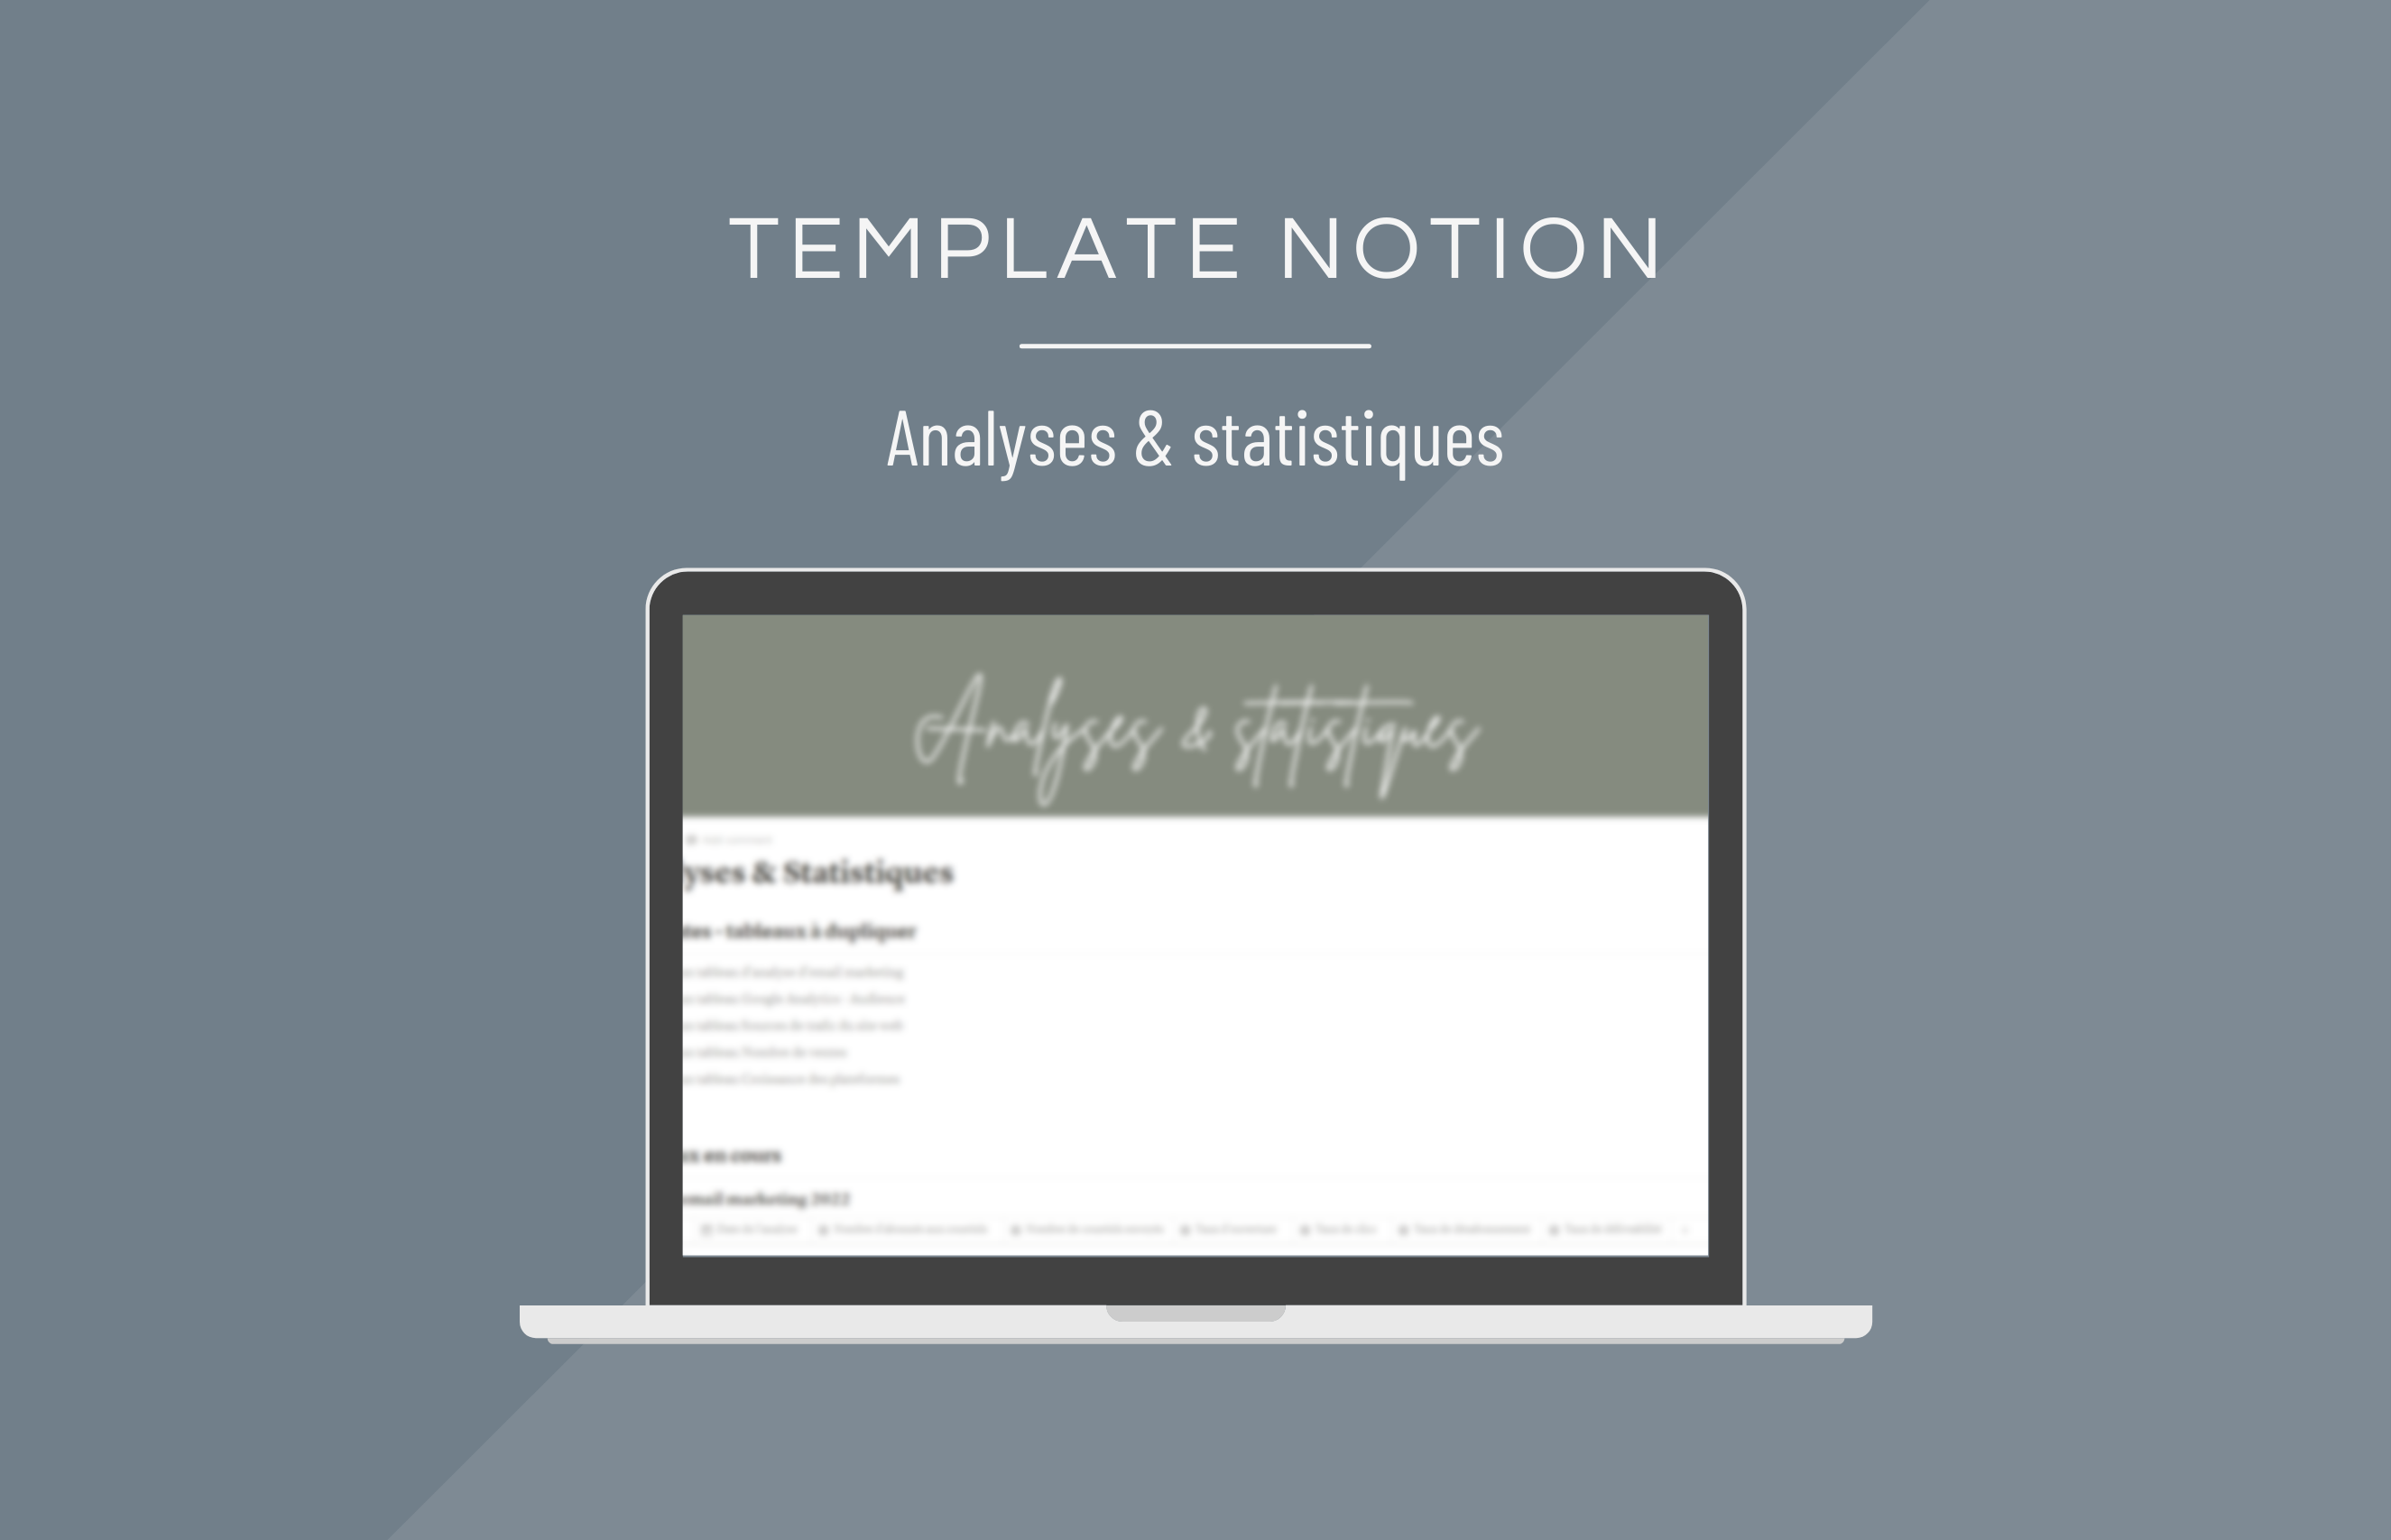 template_notion_analyses_statistiques